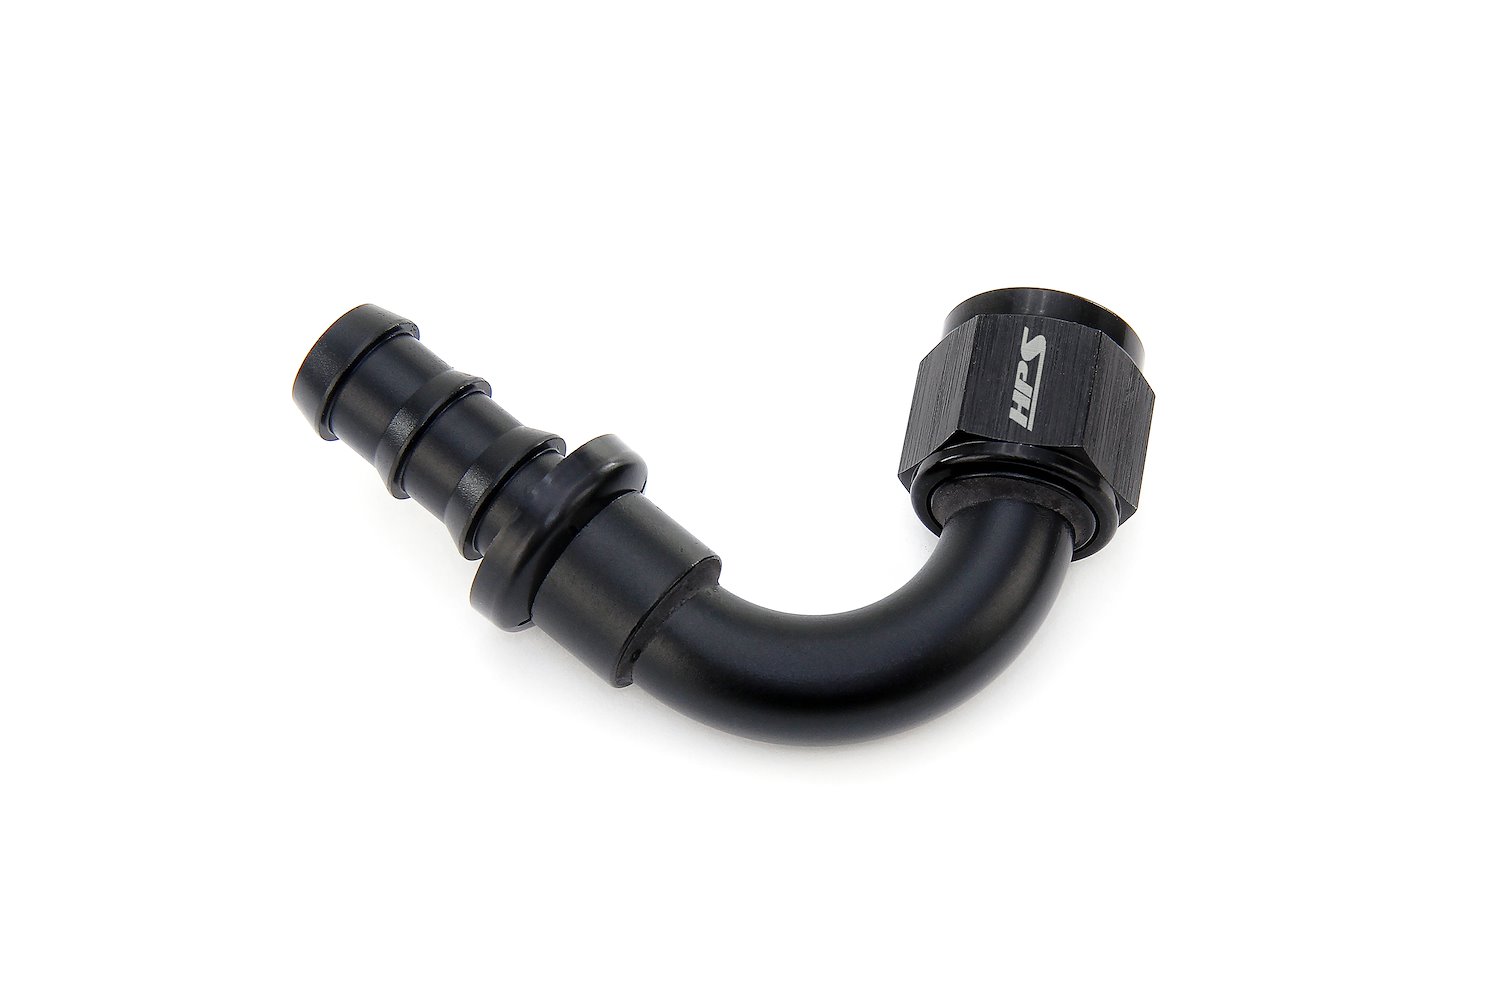 150-1212 150 Series 120-Deg Hose End, Tool-Free Assembly Hose Ends, For Push-On Style Hoses, Easy To Use